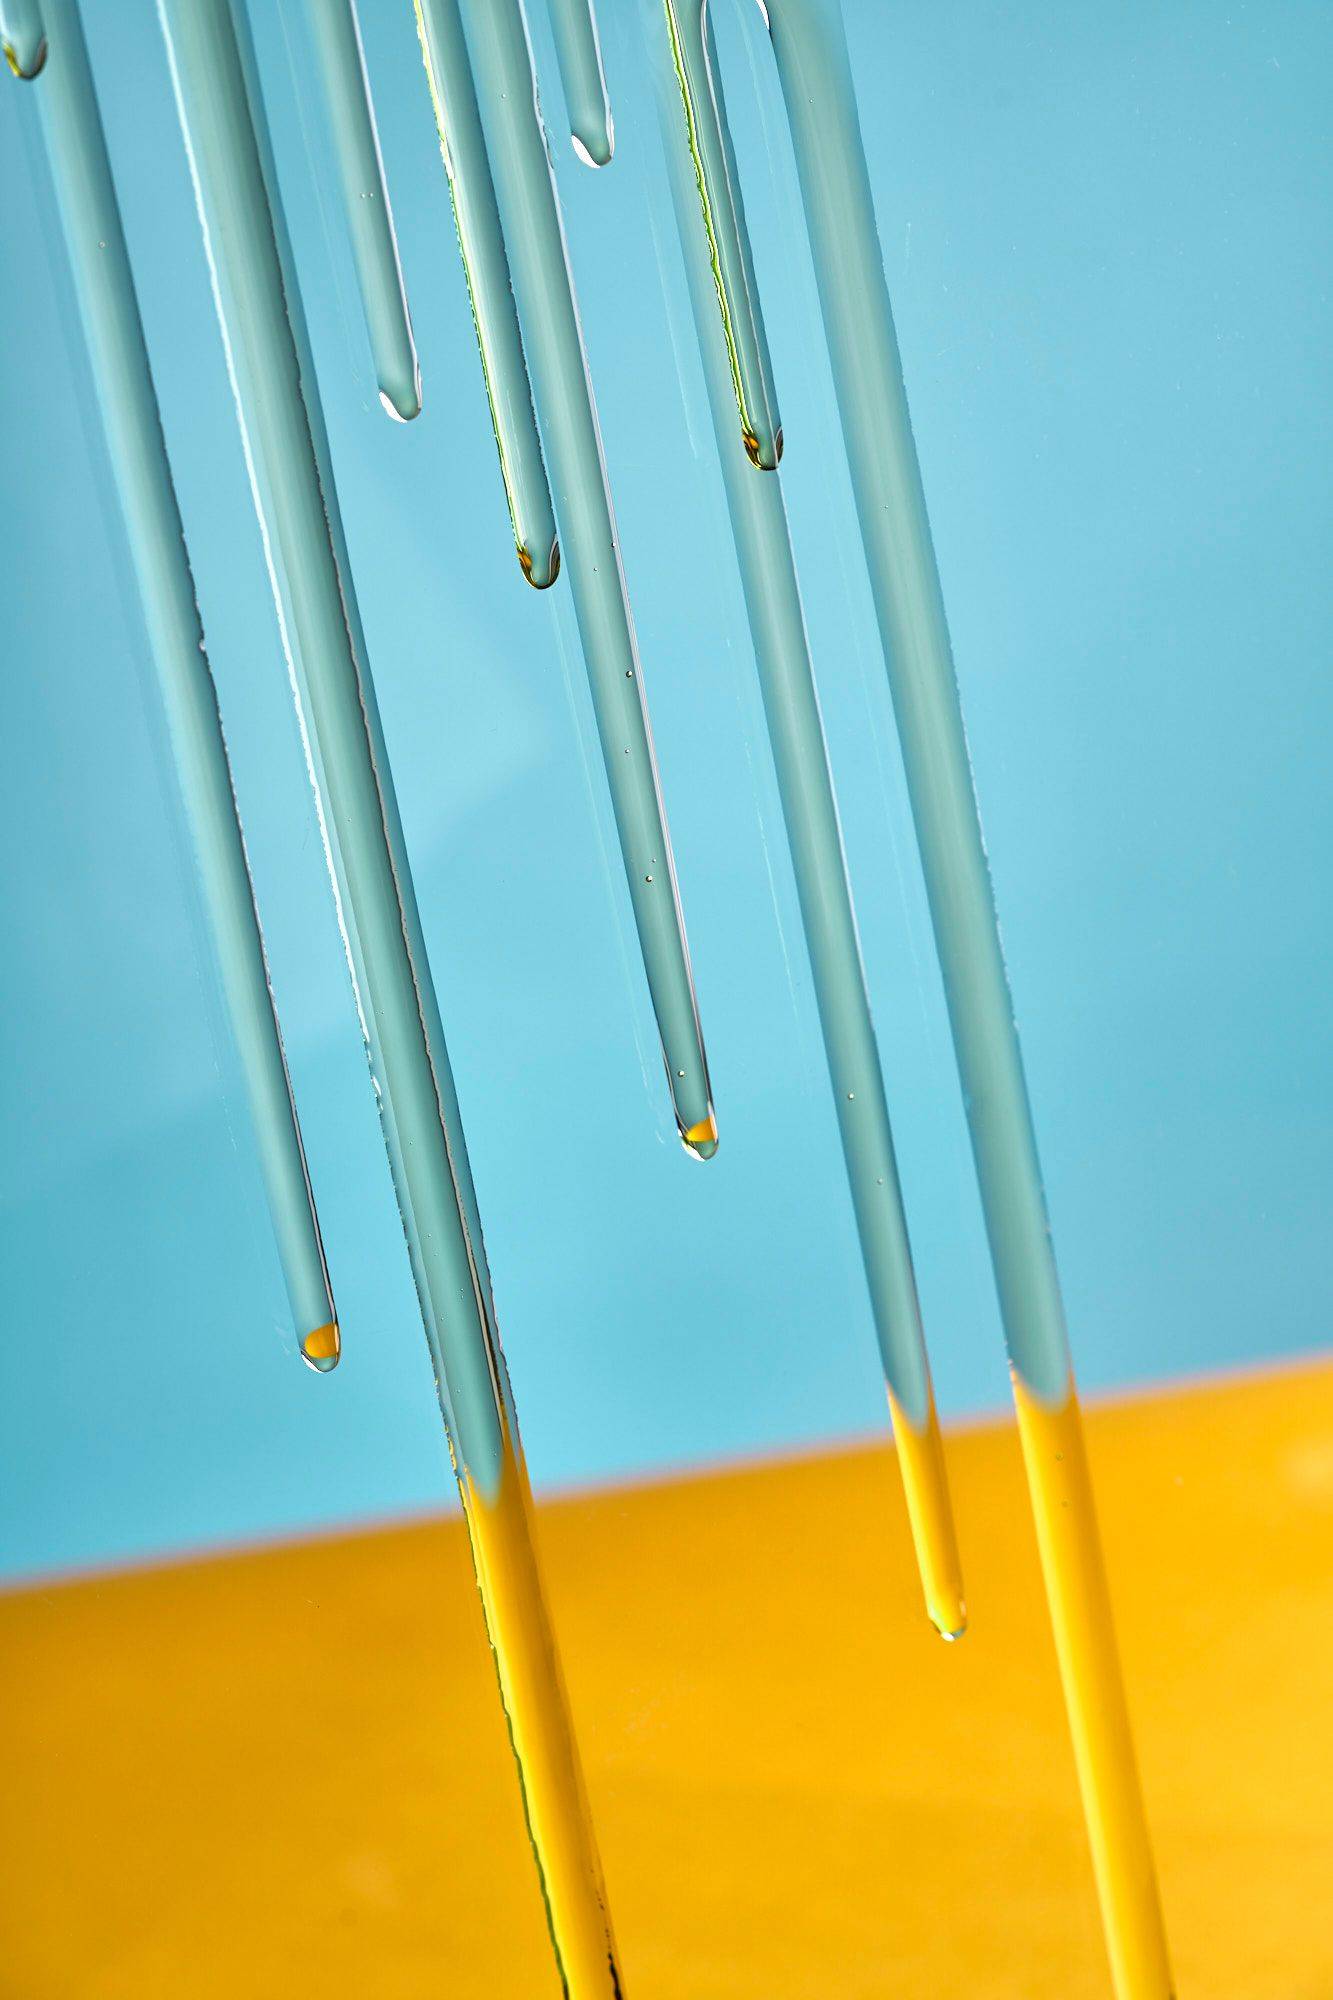 olive oil running down a glass with yellow and blue background